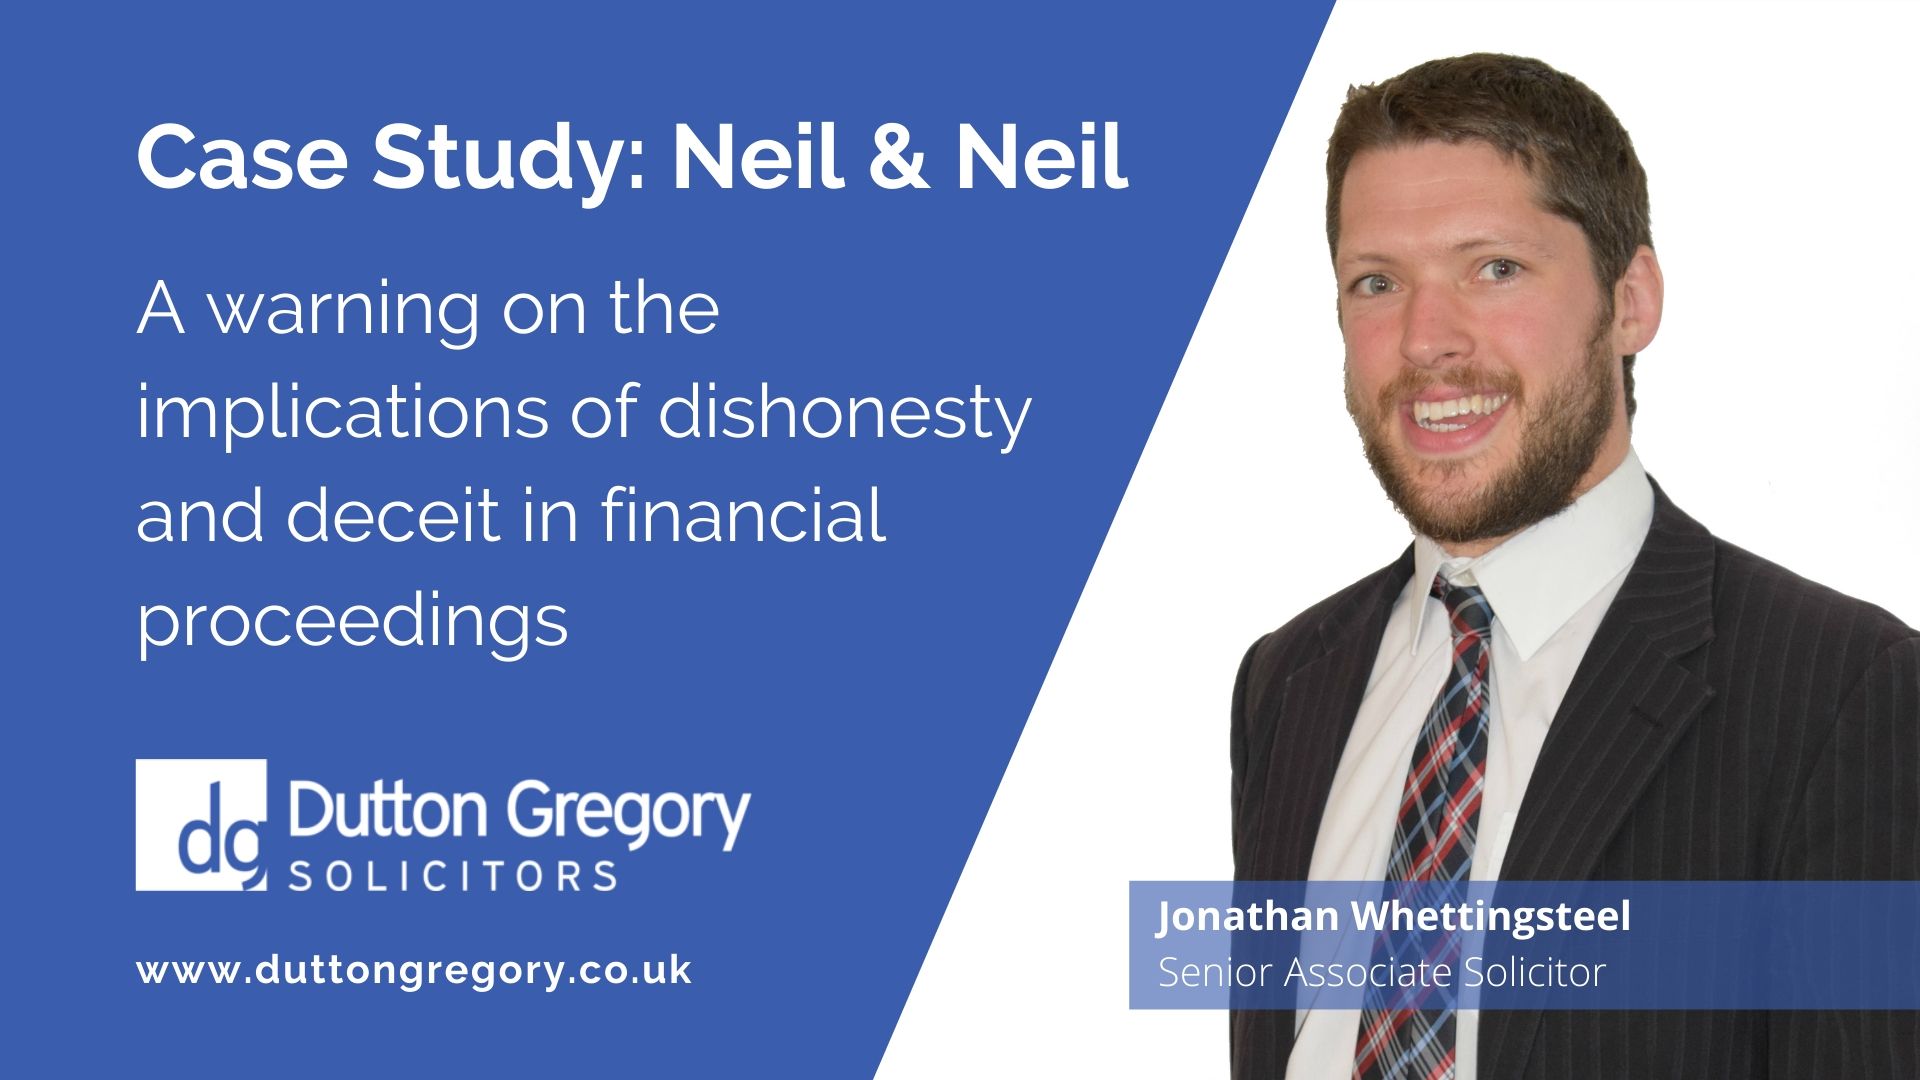 Case Study: Neil & Neil - A warning on the implications of dishonesty and deceit in financial proceedings